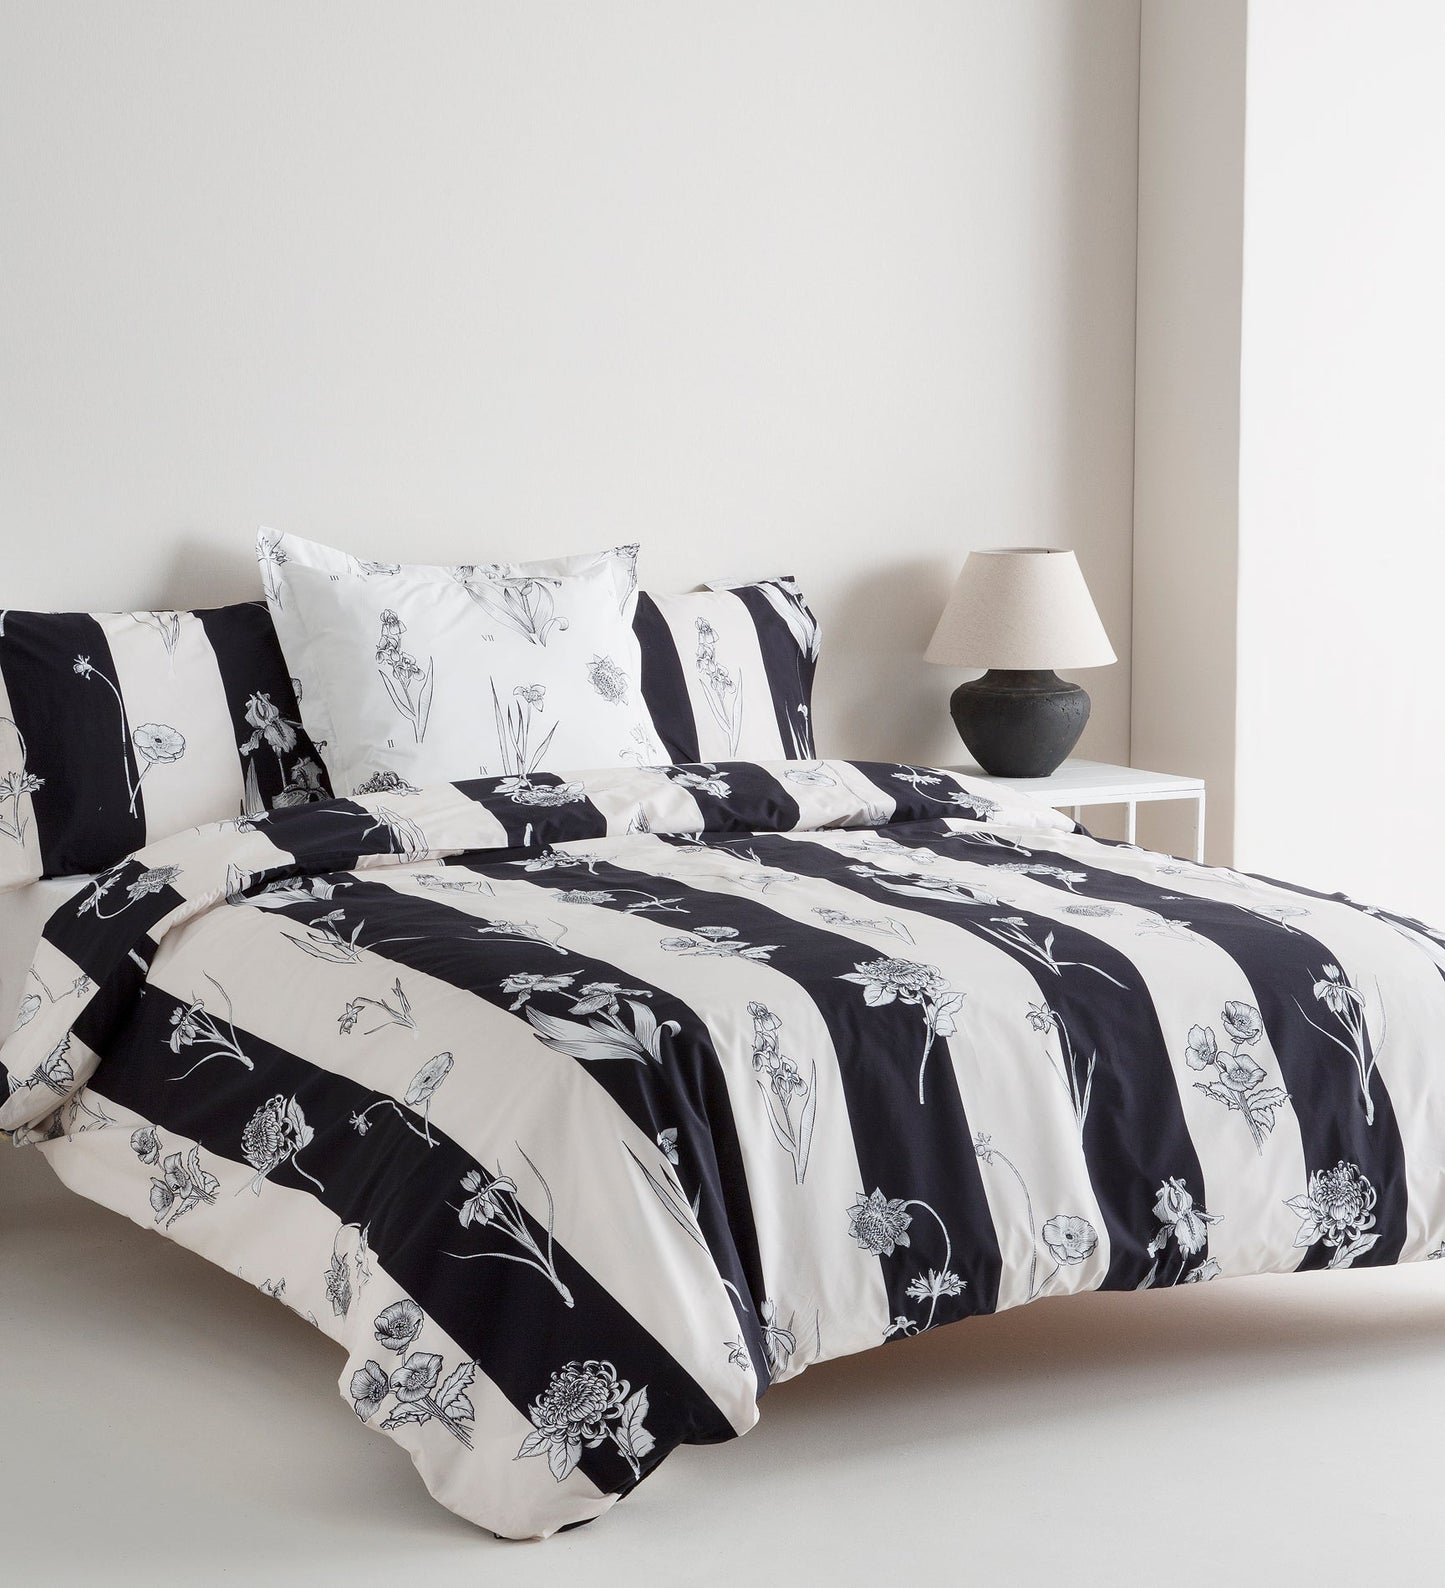 Reversible Percale Duvet Cover 200h Bed 135 - Flowers SINMAS Stripes